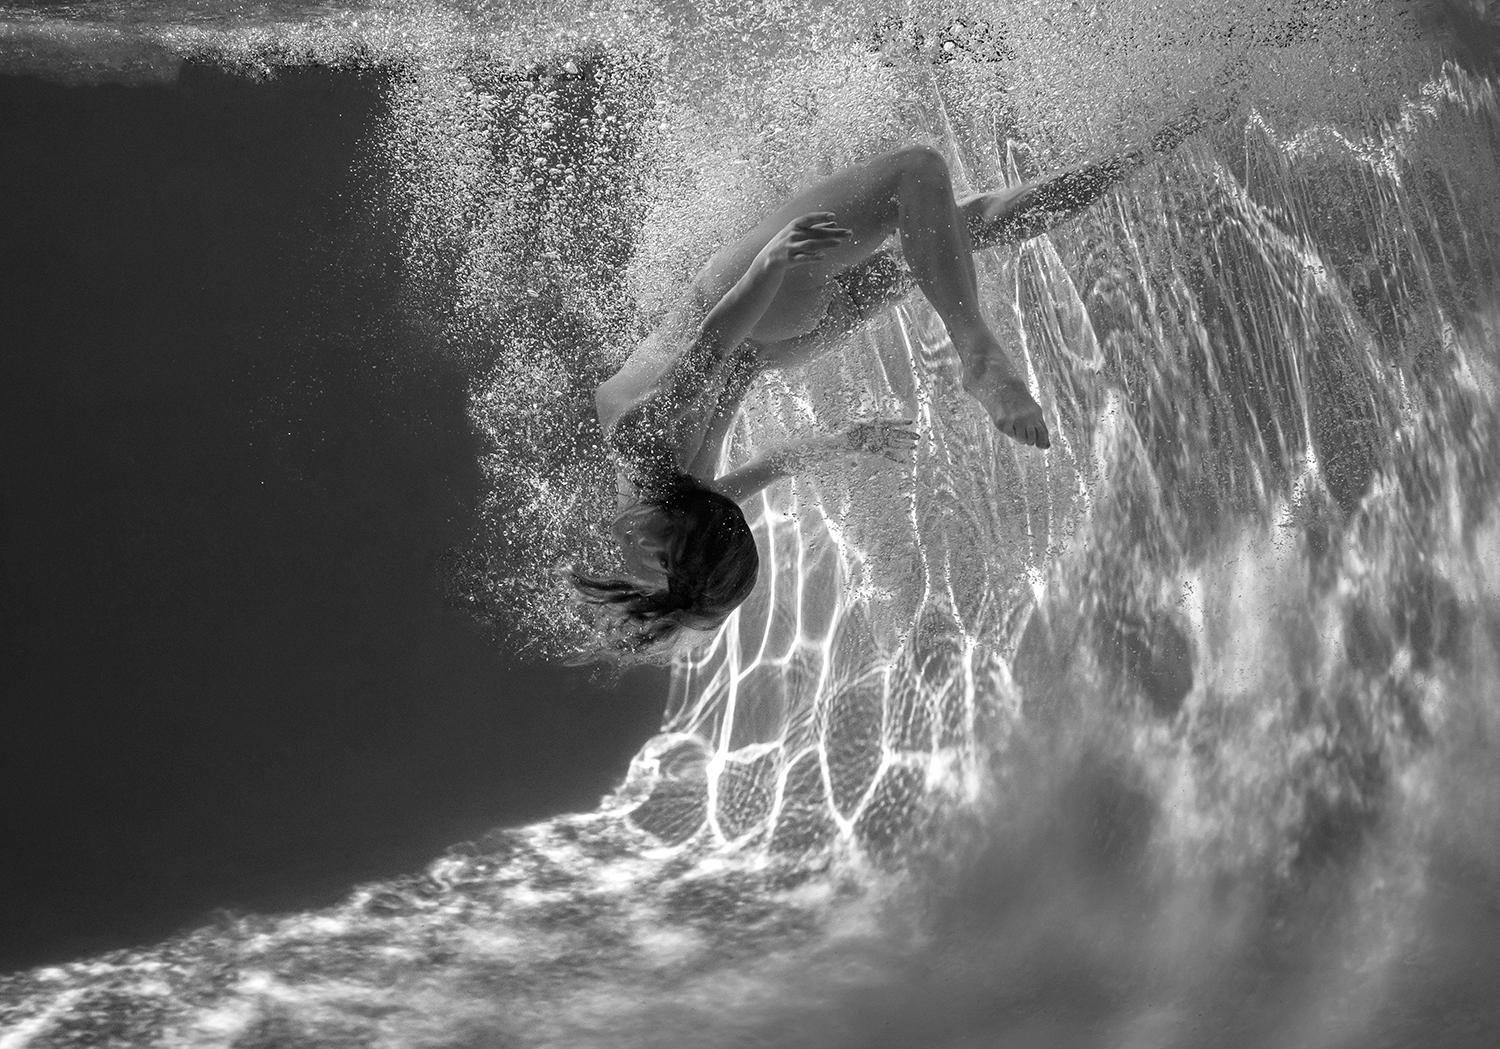 Dragon Mouth Trip - underwater black&white nude photograph - archival print  - Photograph by Alex Sher